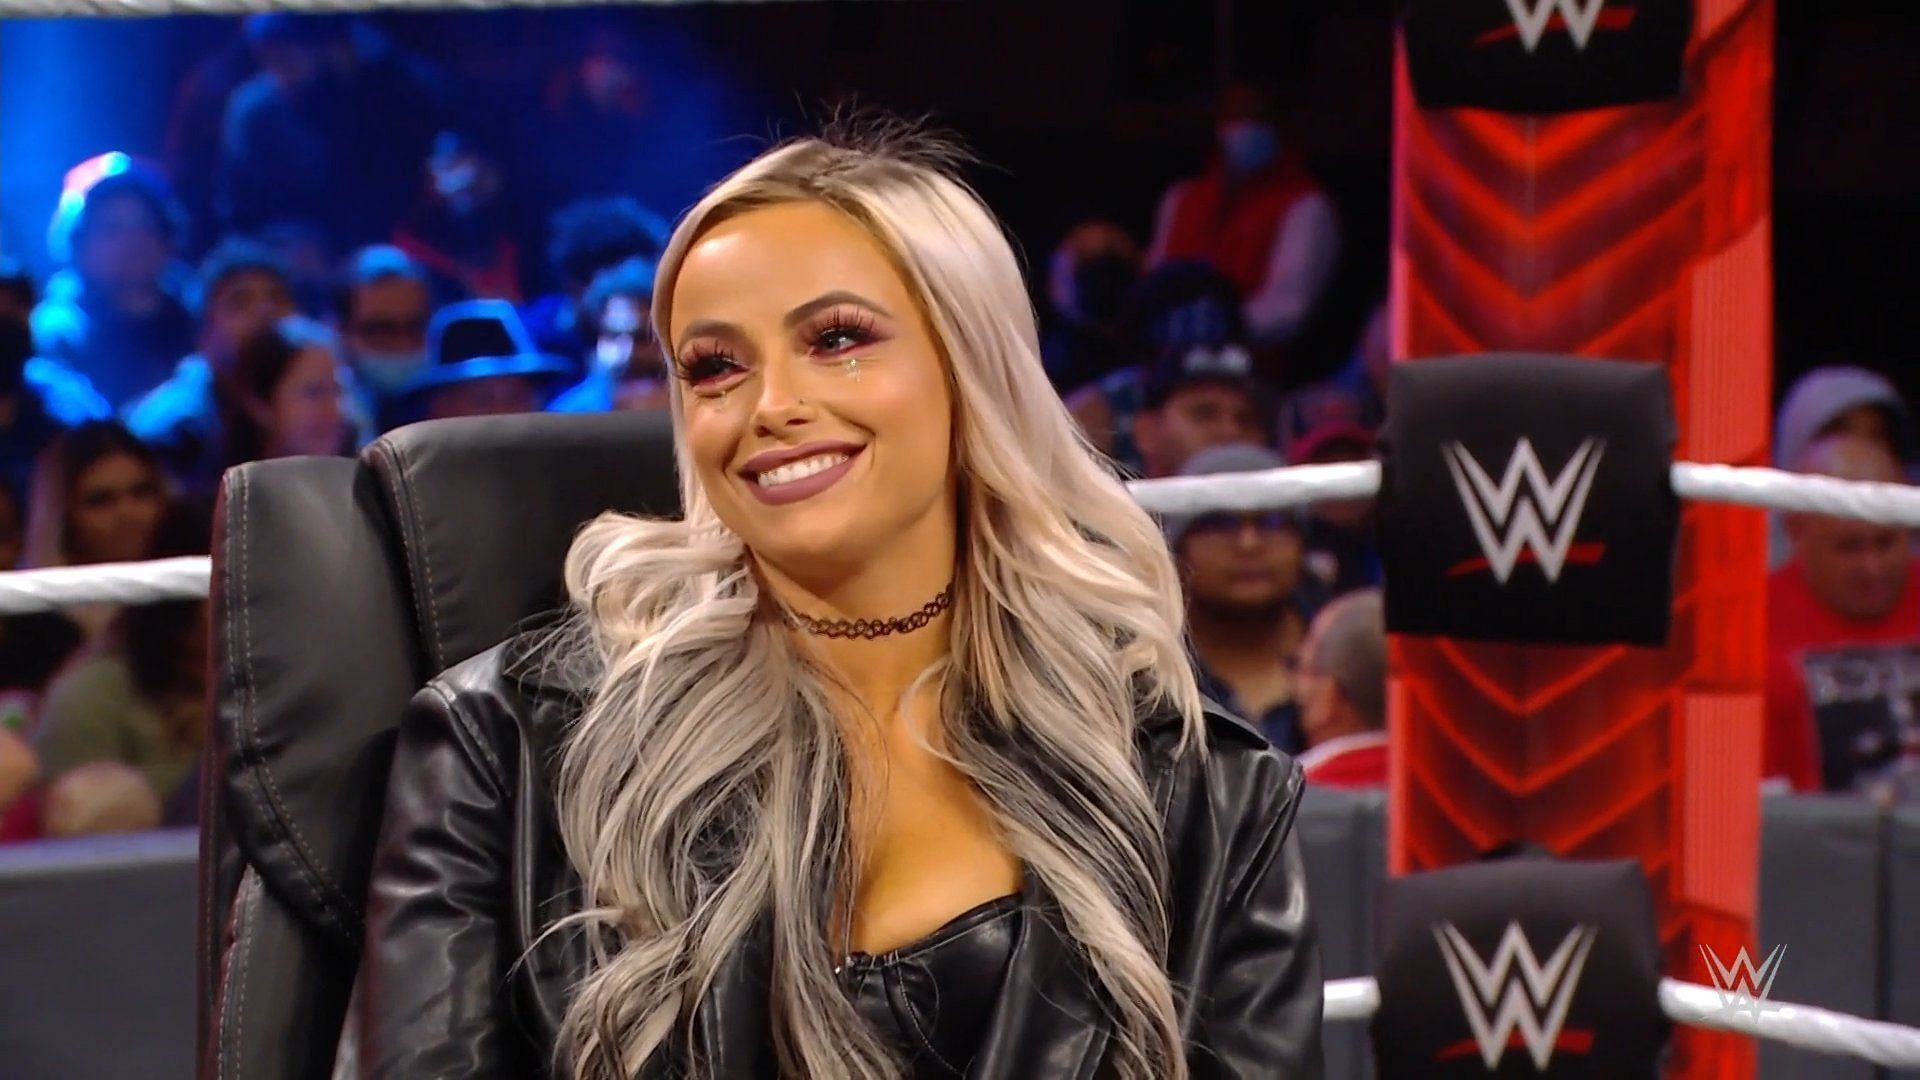 WWE Superstar Liv Morgan currently competes on RAW